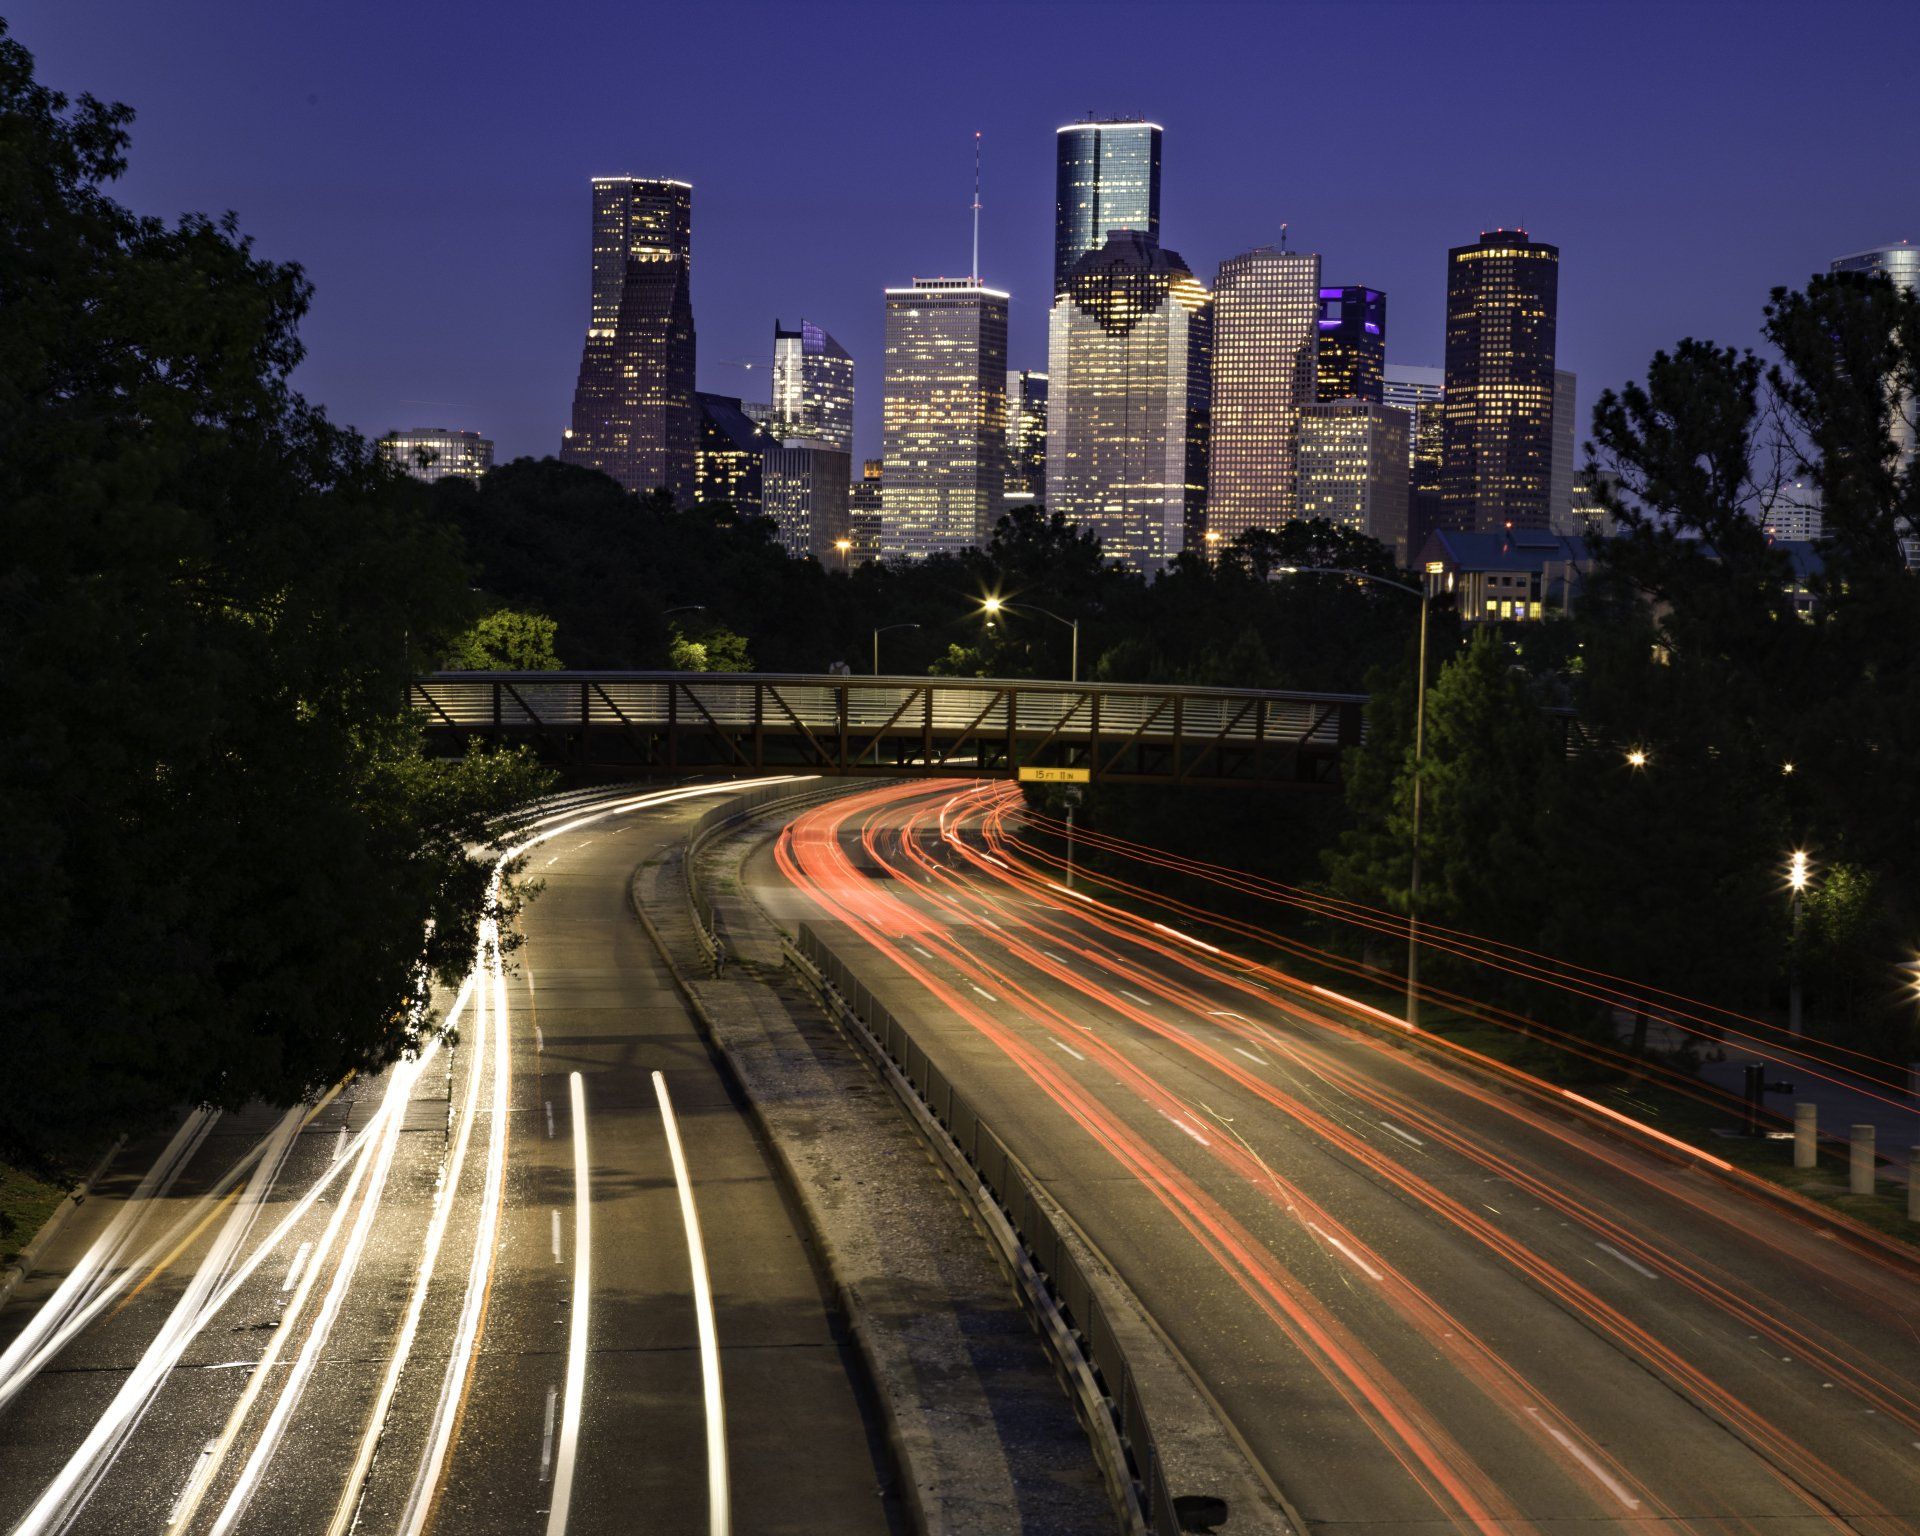 A highway at night with a city skyline in the background